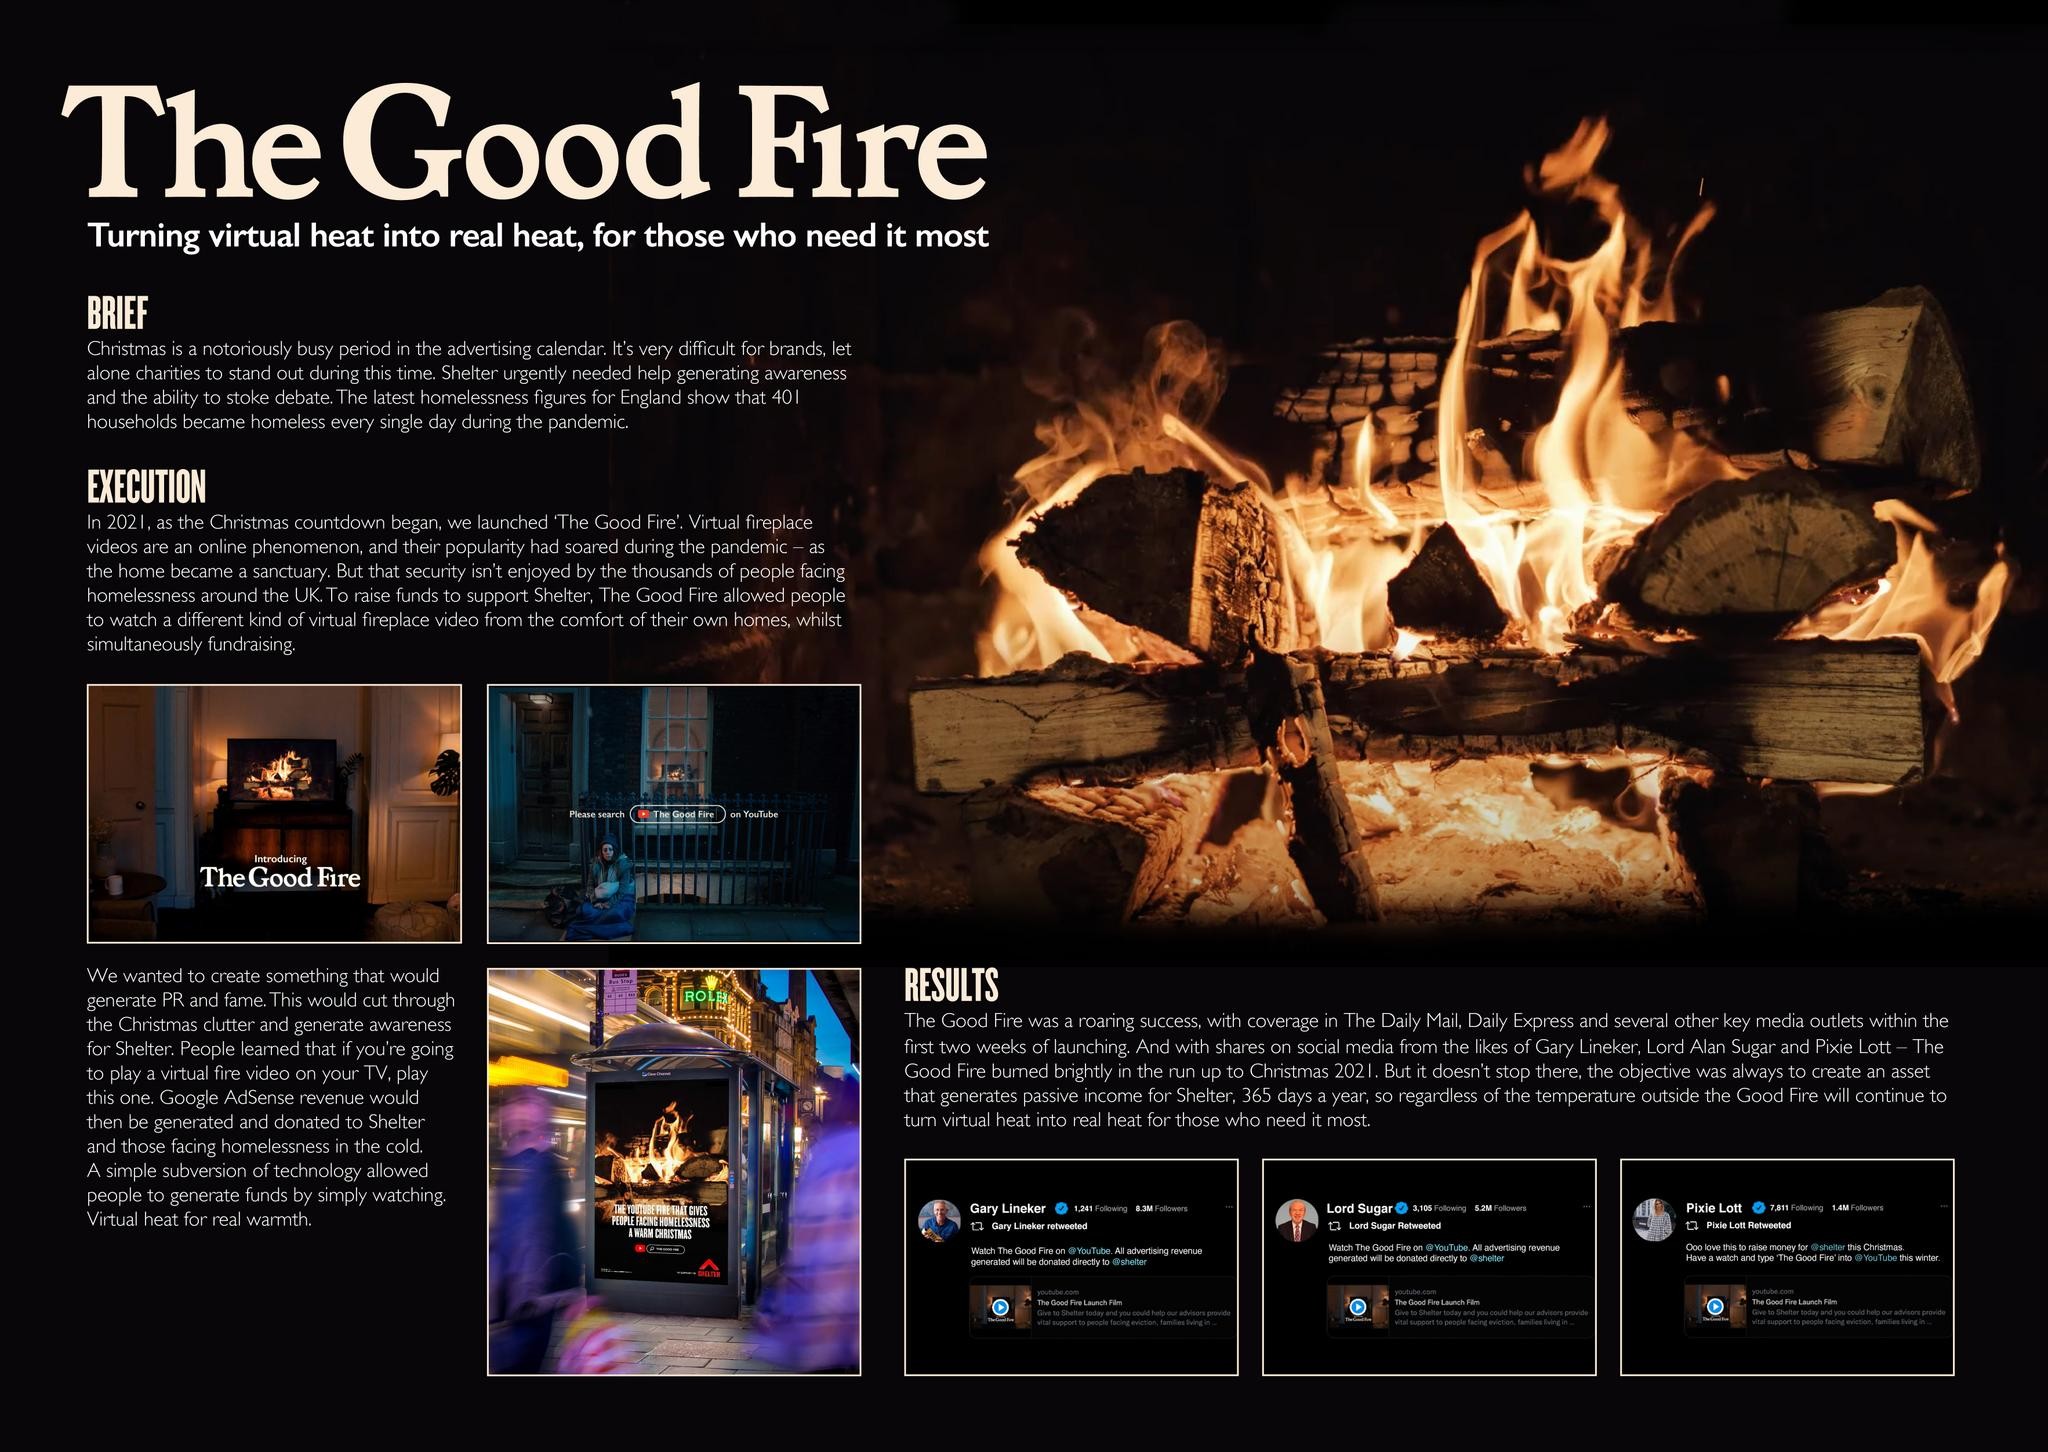 The Good Fire